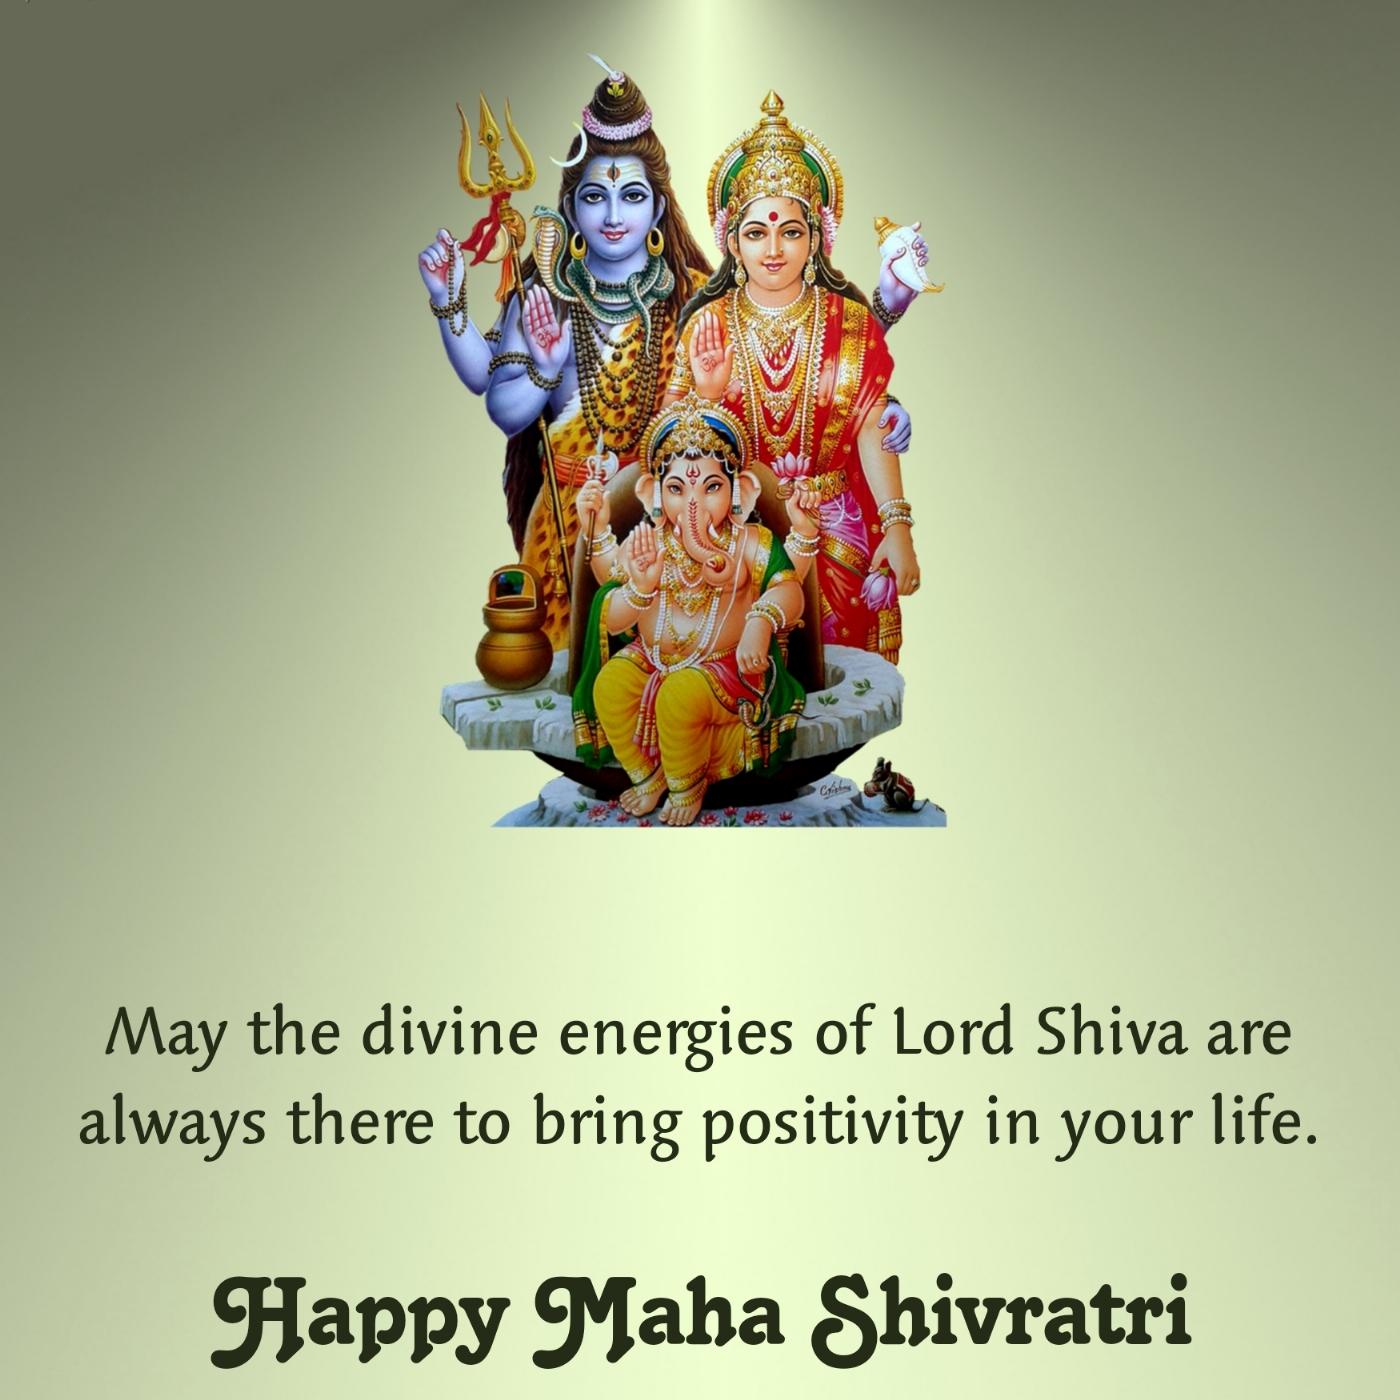 May the divine energies of Lord Shiva are always there to bring positivity in your life